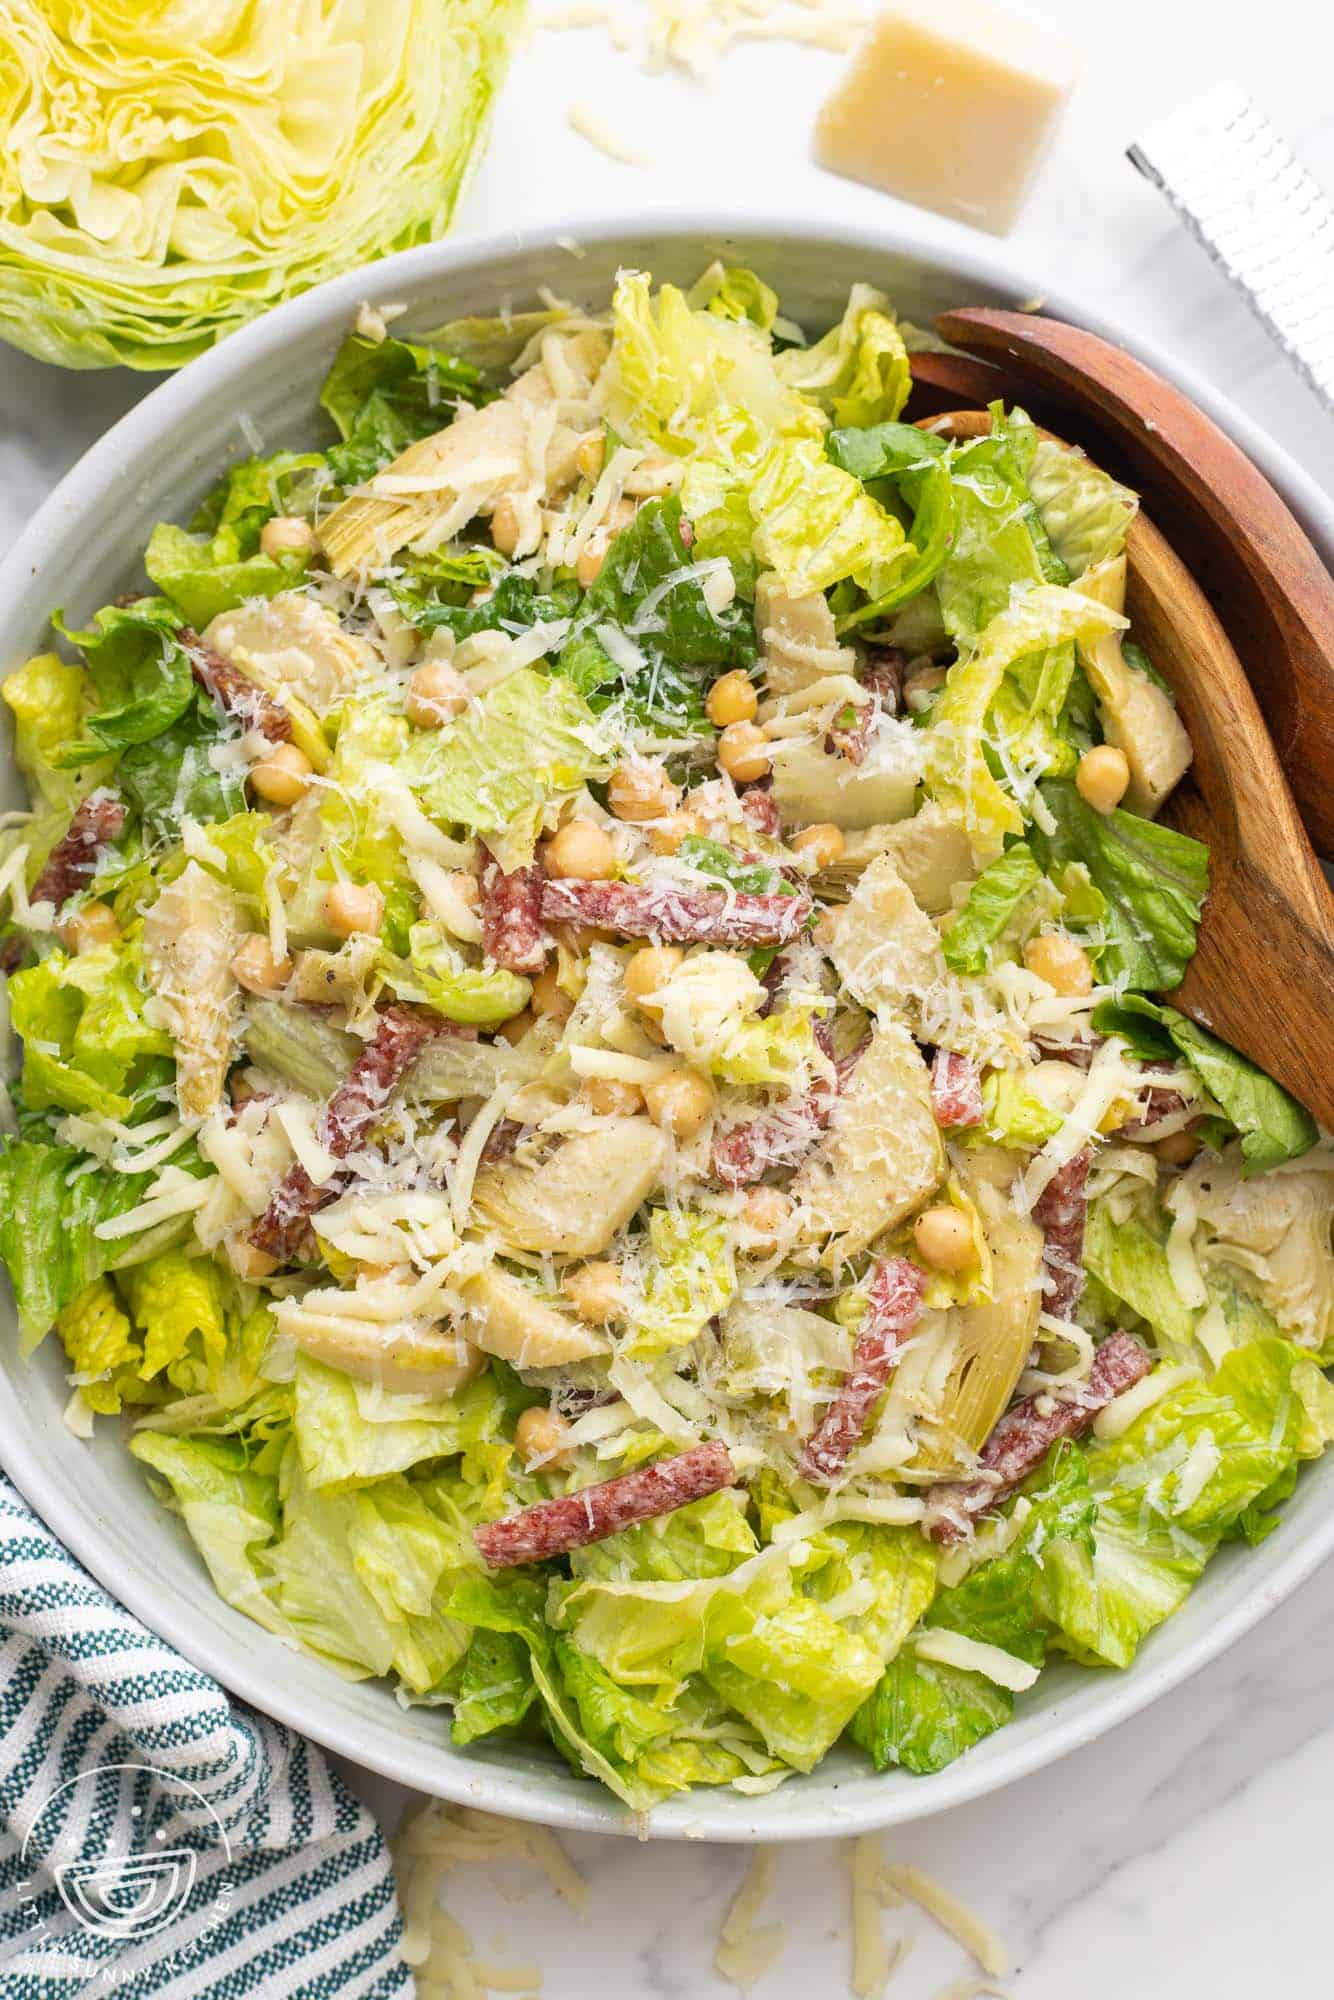 Italian Chopped Salad Recipe with Chicken - From A Chef's Kitchen